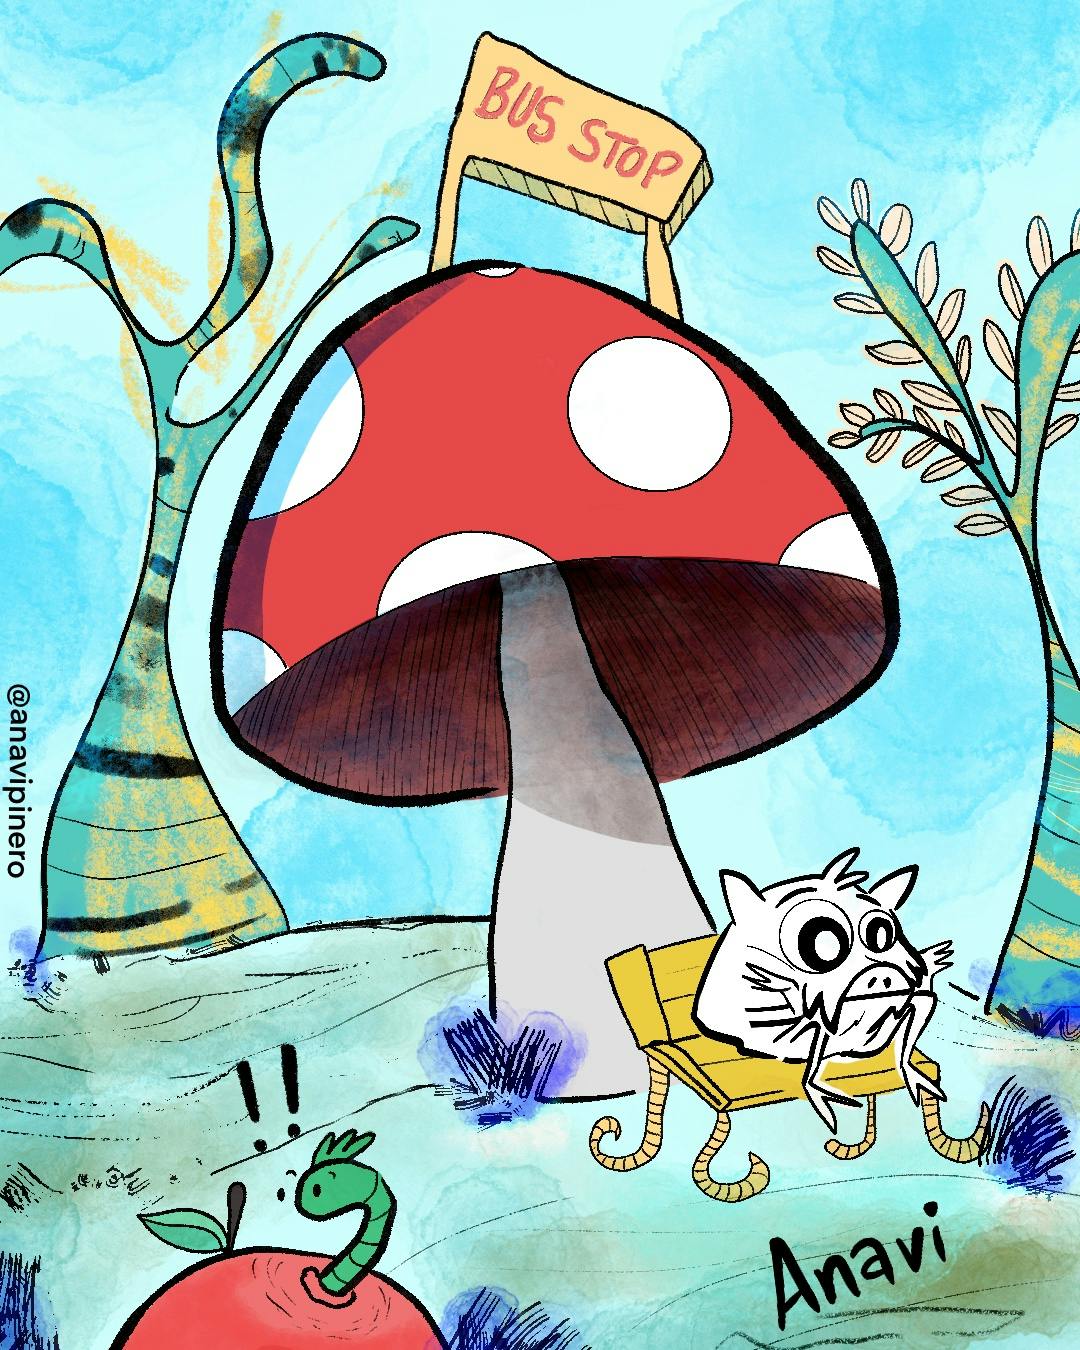 Paco sitting on a bench at a bus stop that is also a giant mushroom